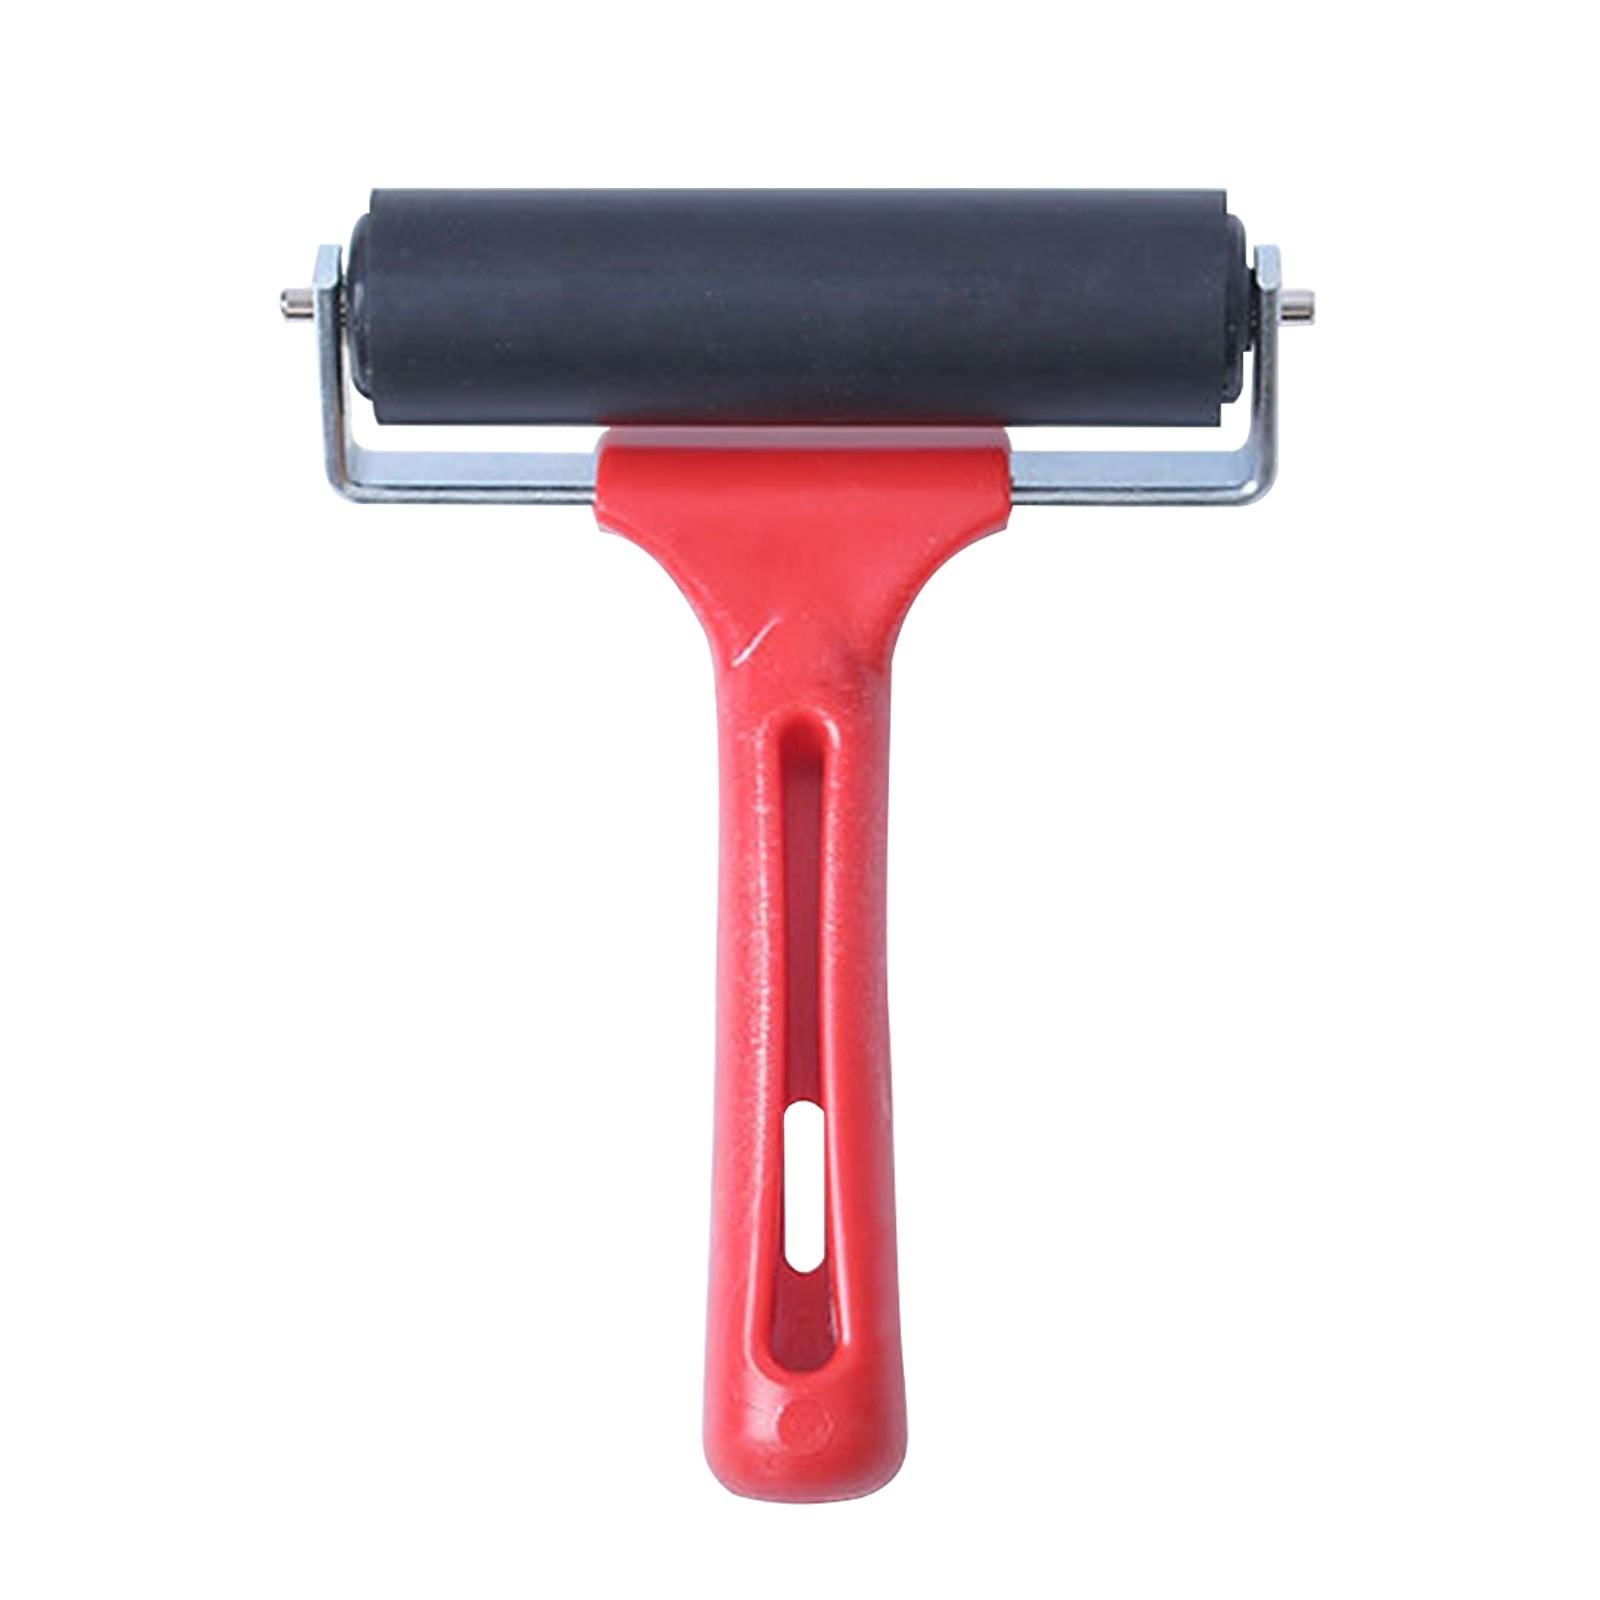 2Pcs Rubber Brayer Roller, Hard Rubber Brayer Applicator for Arts, Crafts,  Ink, Printmaking, Painting, 3.8 inch & 2.2 inch 